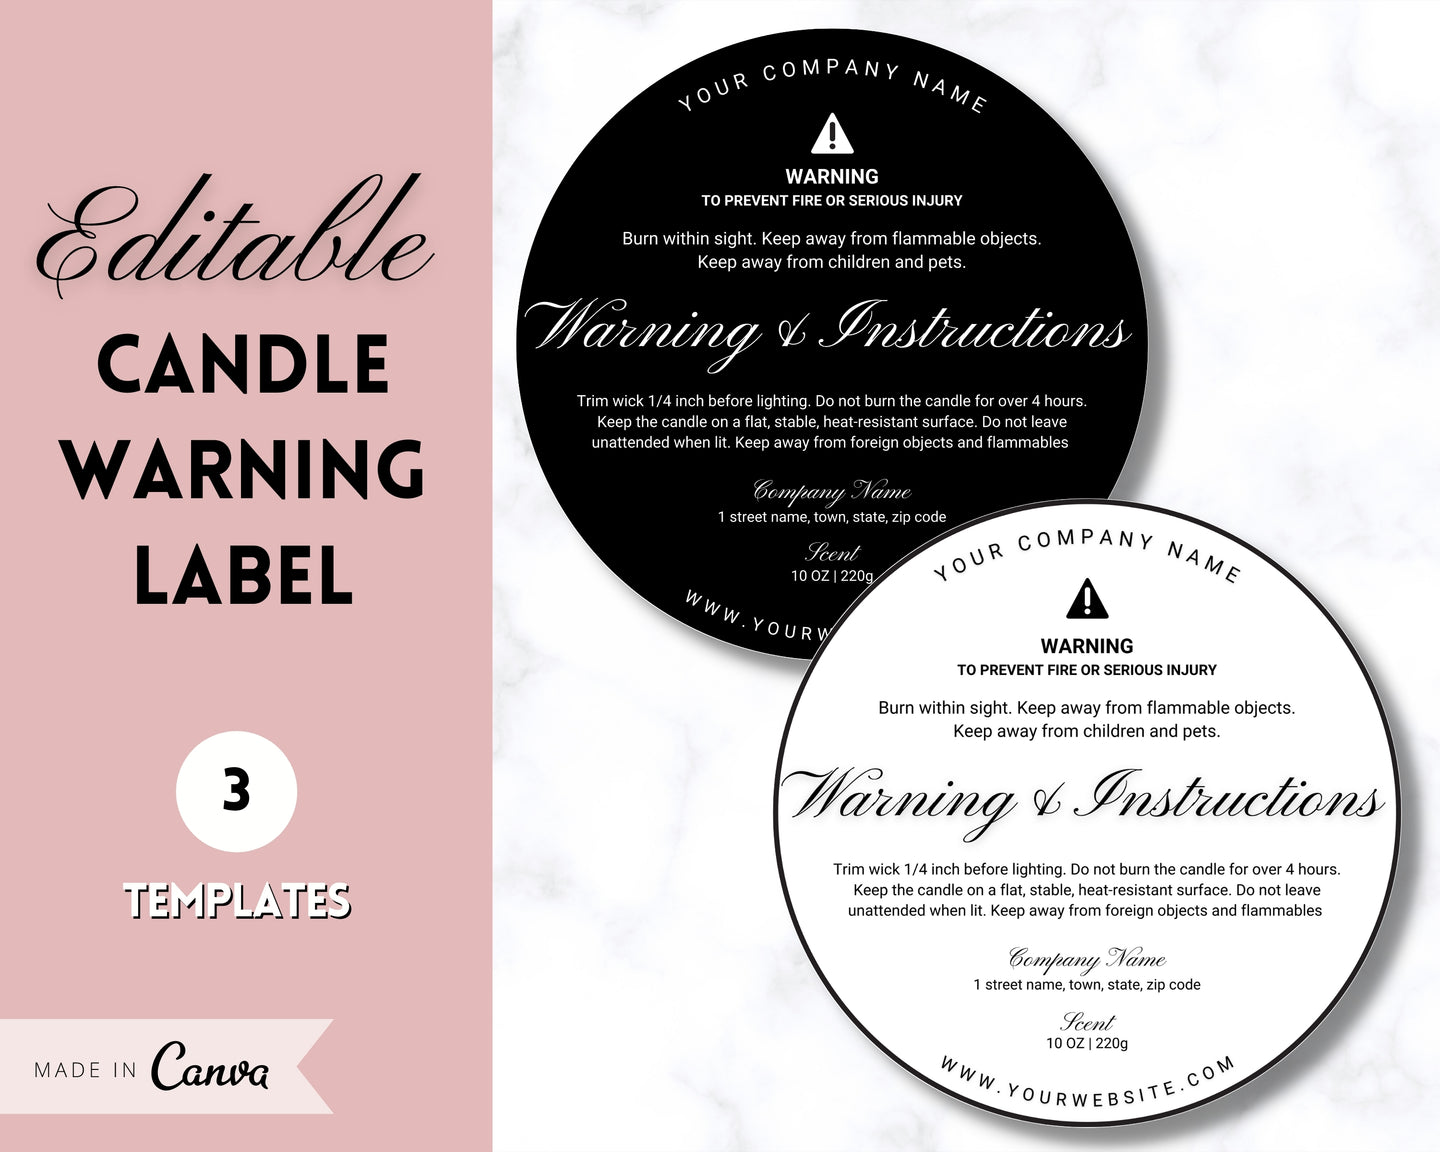 EDITABLE Candle Warning Label Template | Candle Care & Fire Safety Instructions, Round Packaging Label Care Card, Candle Maker Seller | Fancy